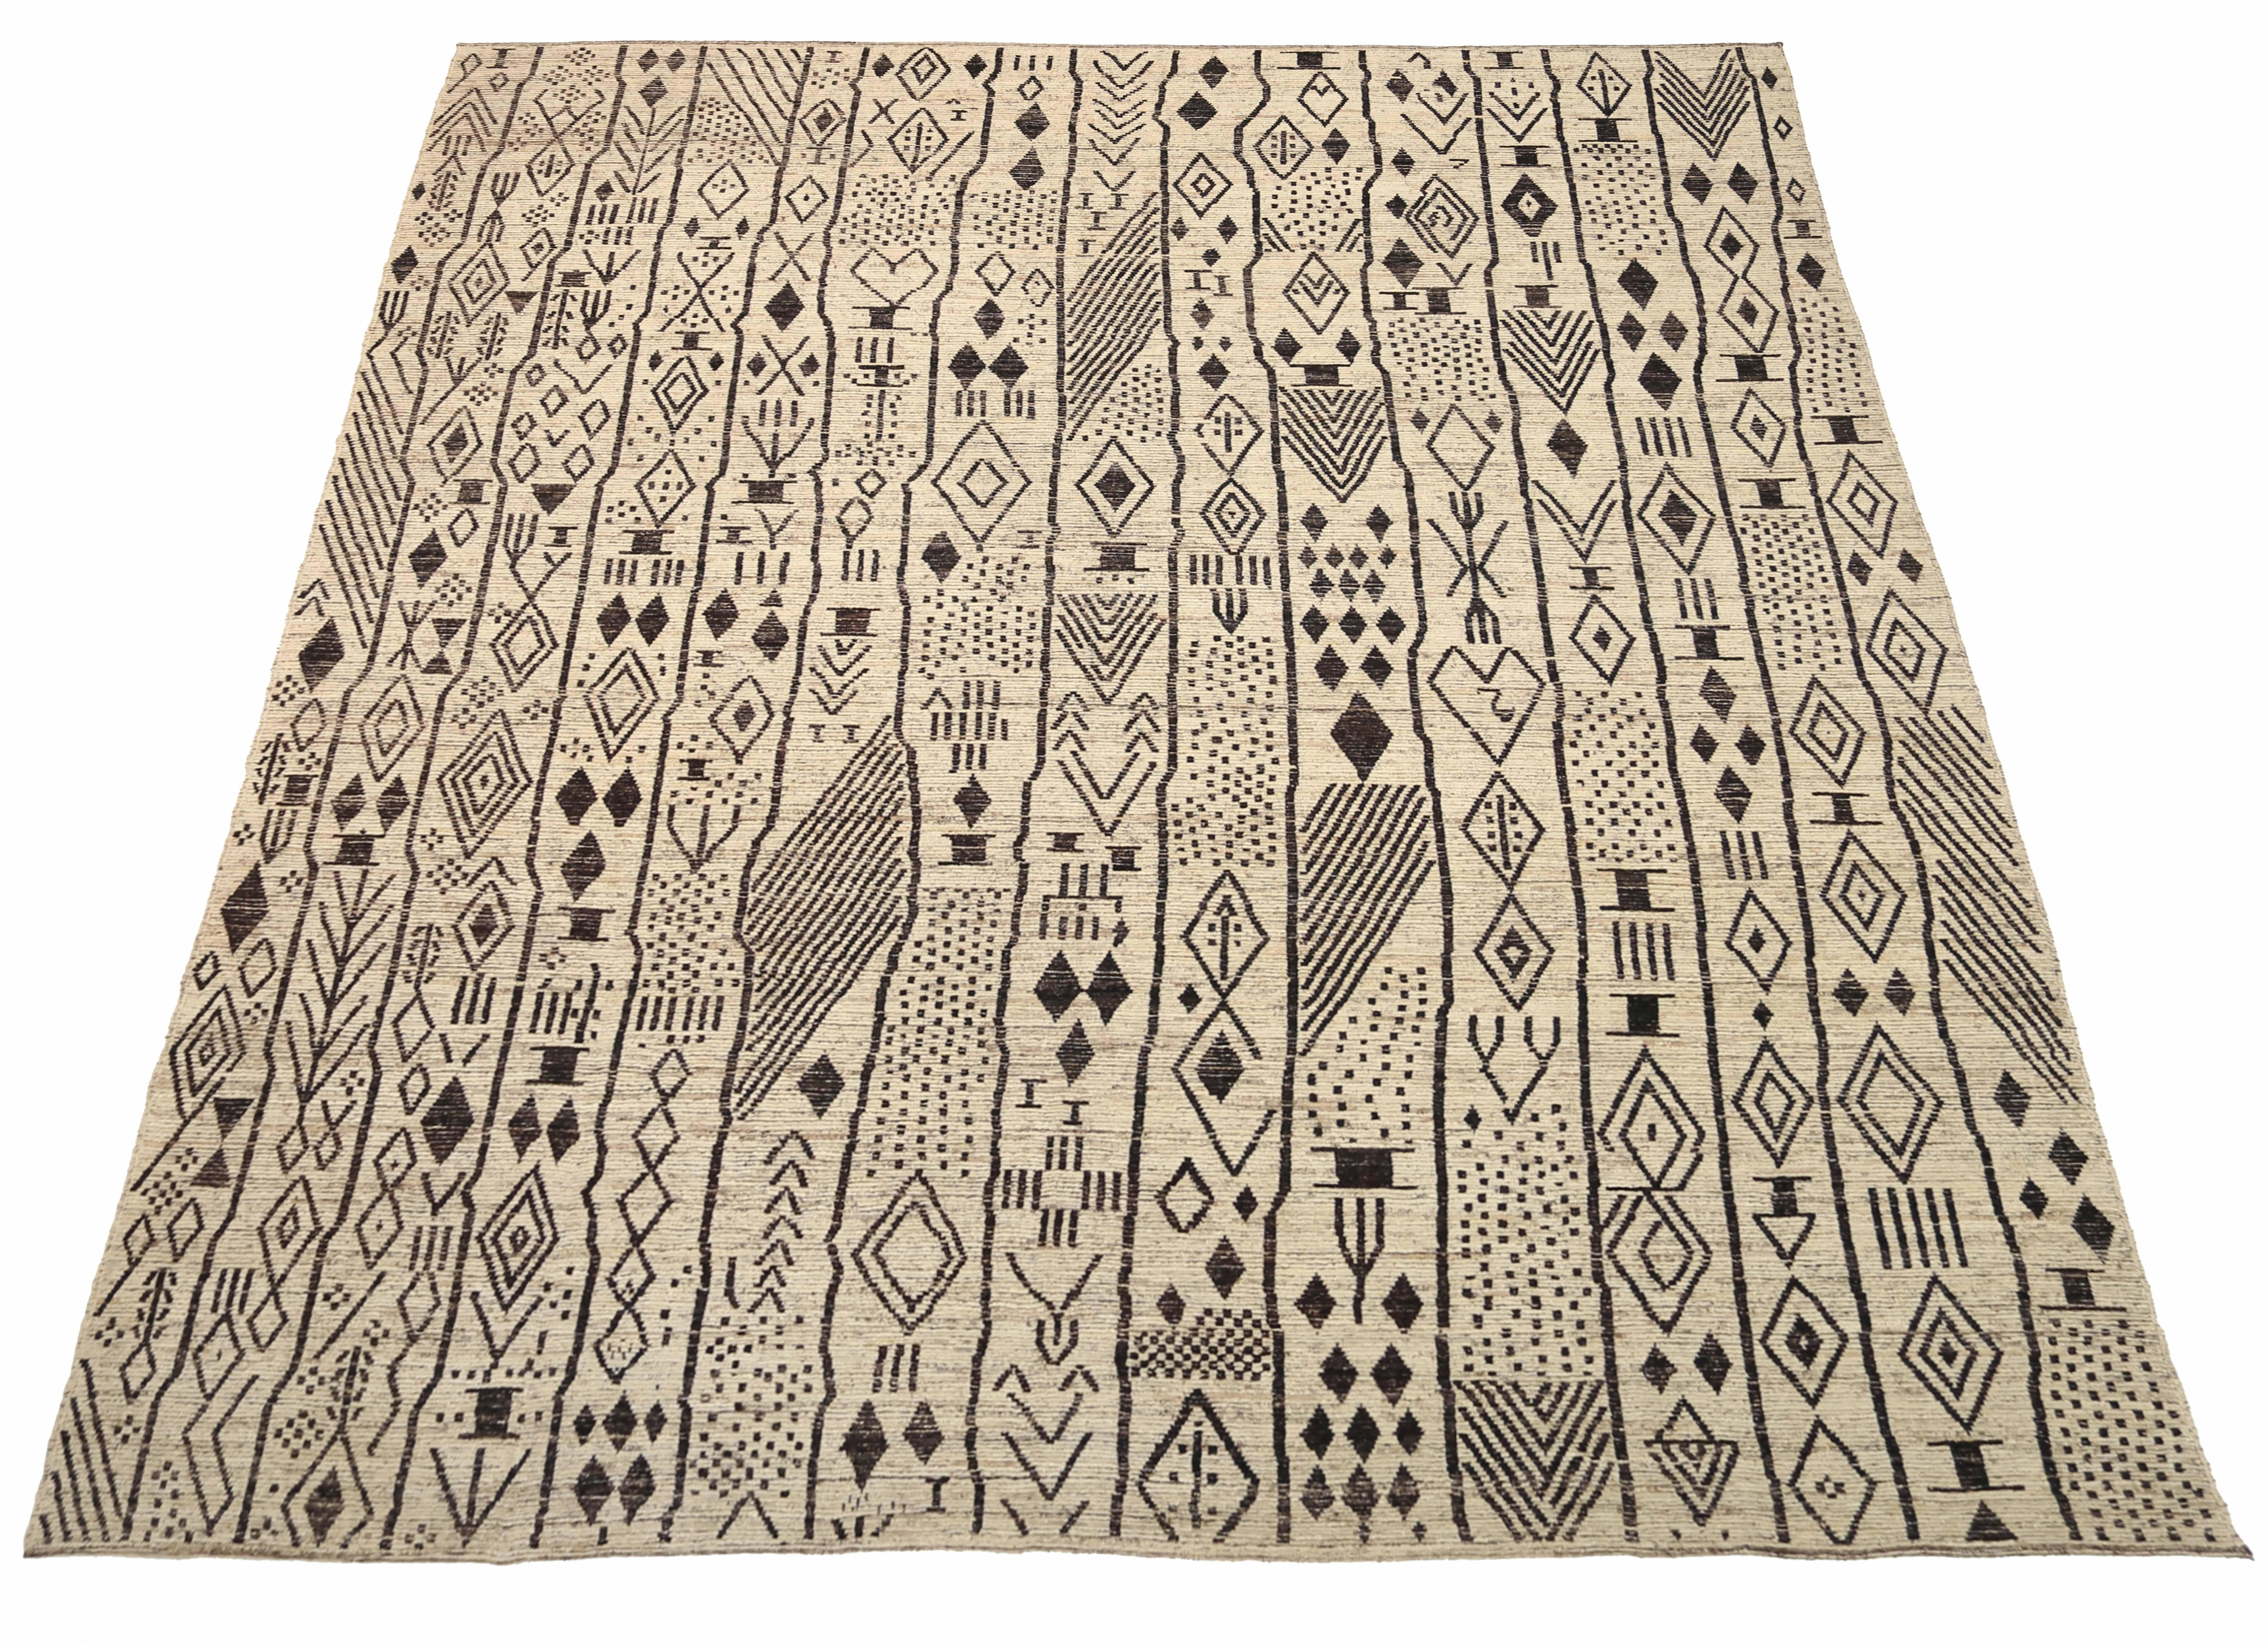 New Afghan area rug handwoven from the finest sheep’s wool. It’s colored with all-natural vegetable dyes that are safe for humans and pets. It’s a traditional Moroccan design handwoven by expert artisans. It’s a lovely area rug that can be